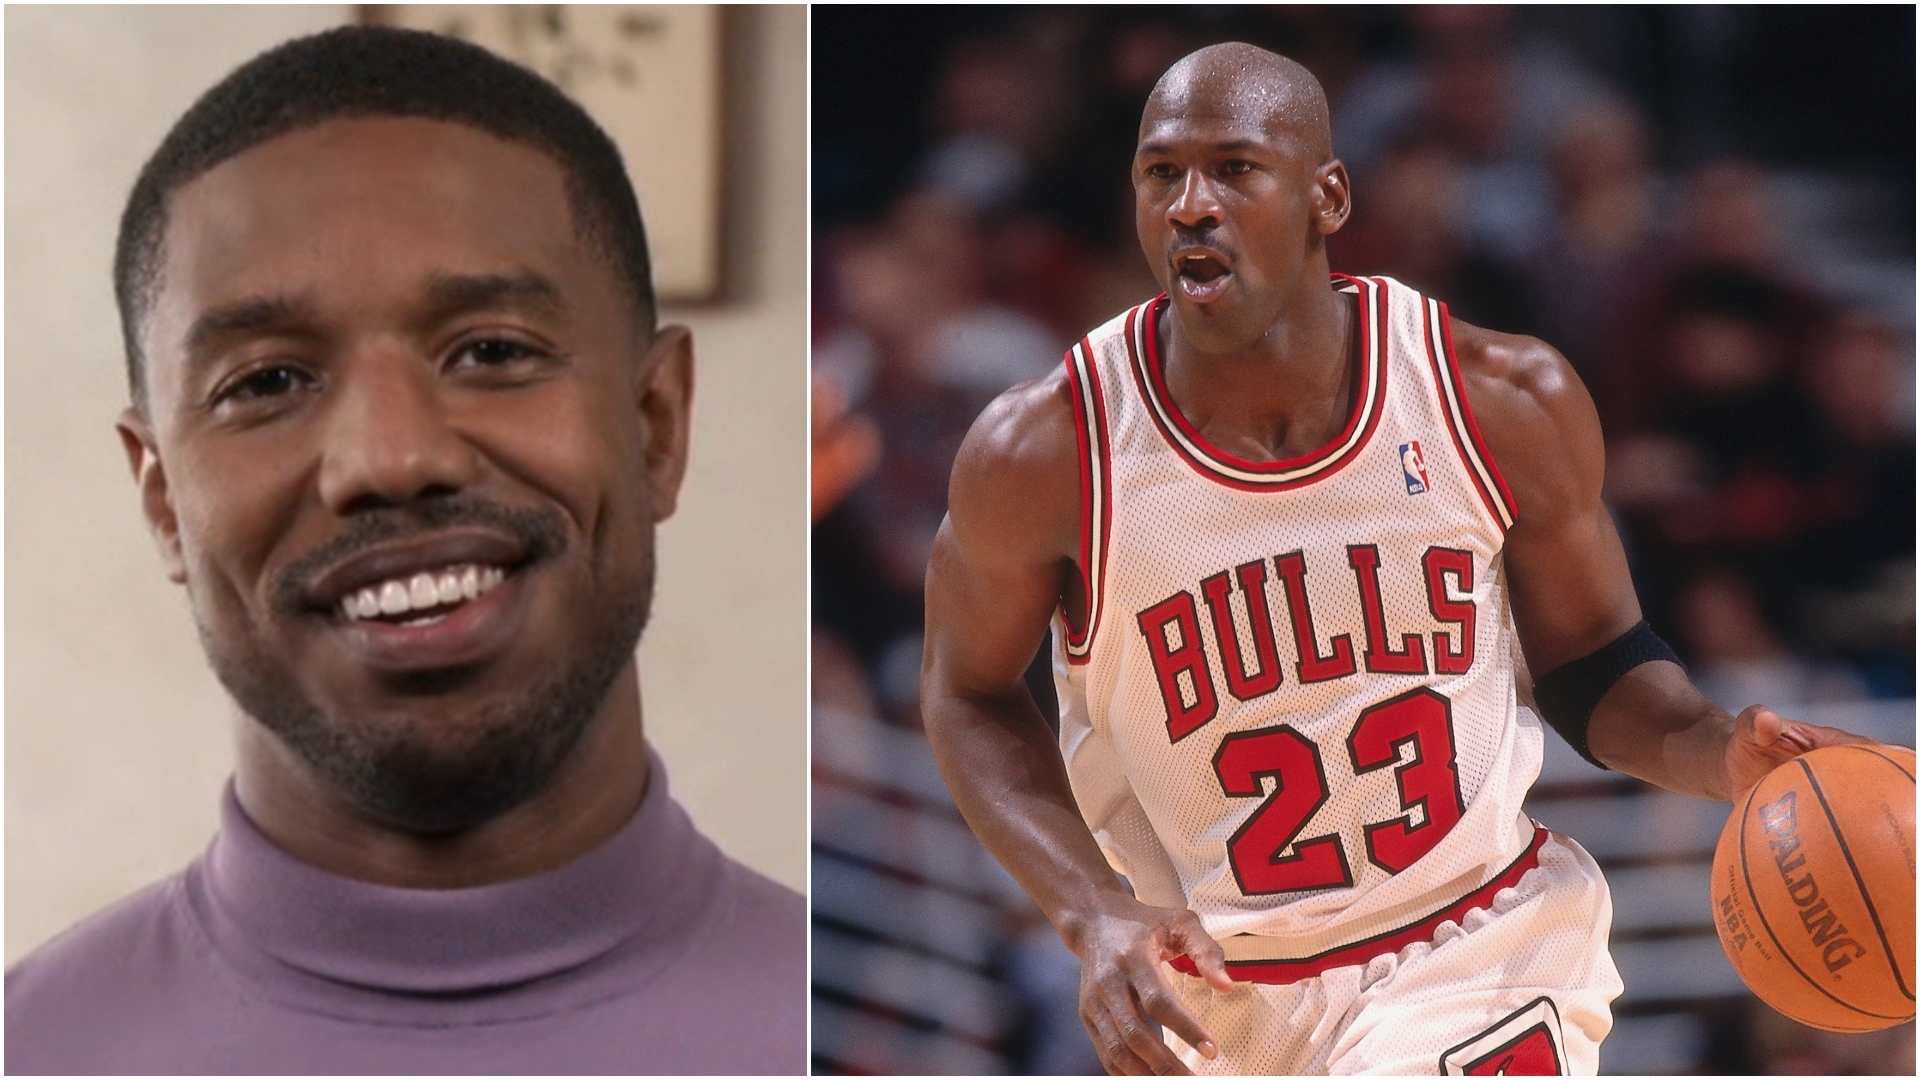 St Northern Oceania Michael B. Jordan says he was teased for sharing a name with MJ | Watch ESPN